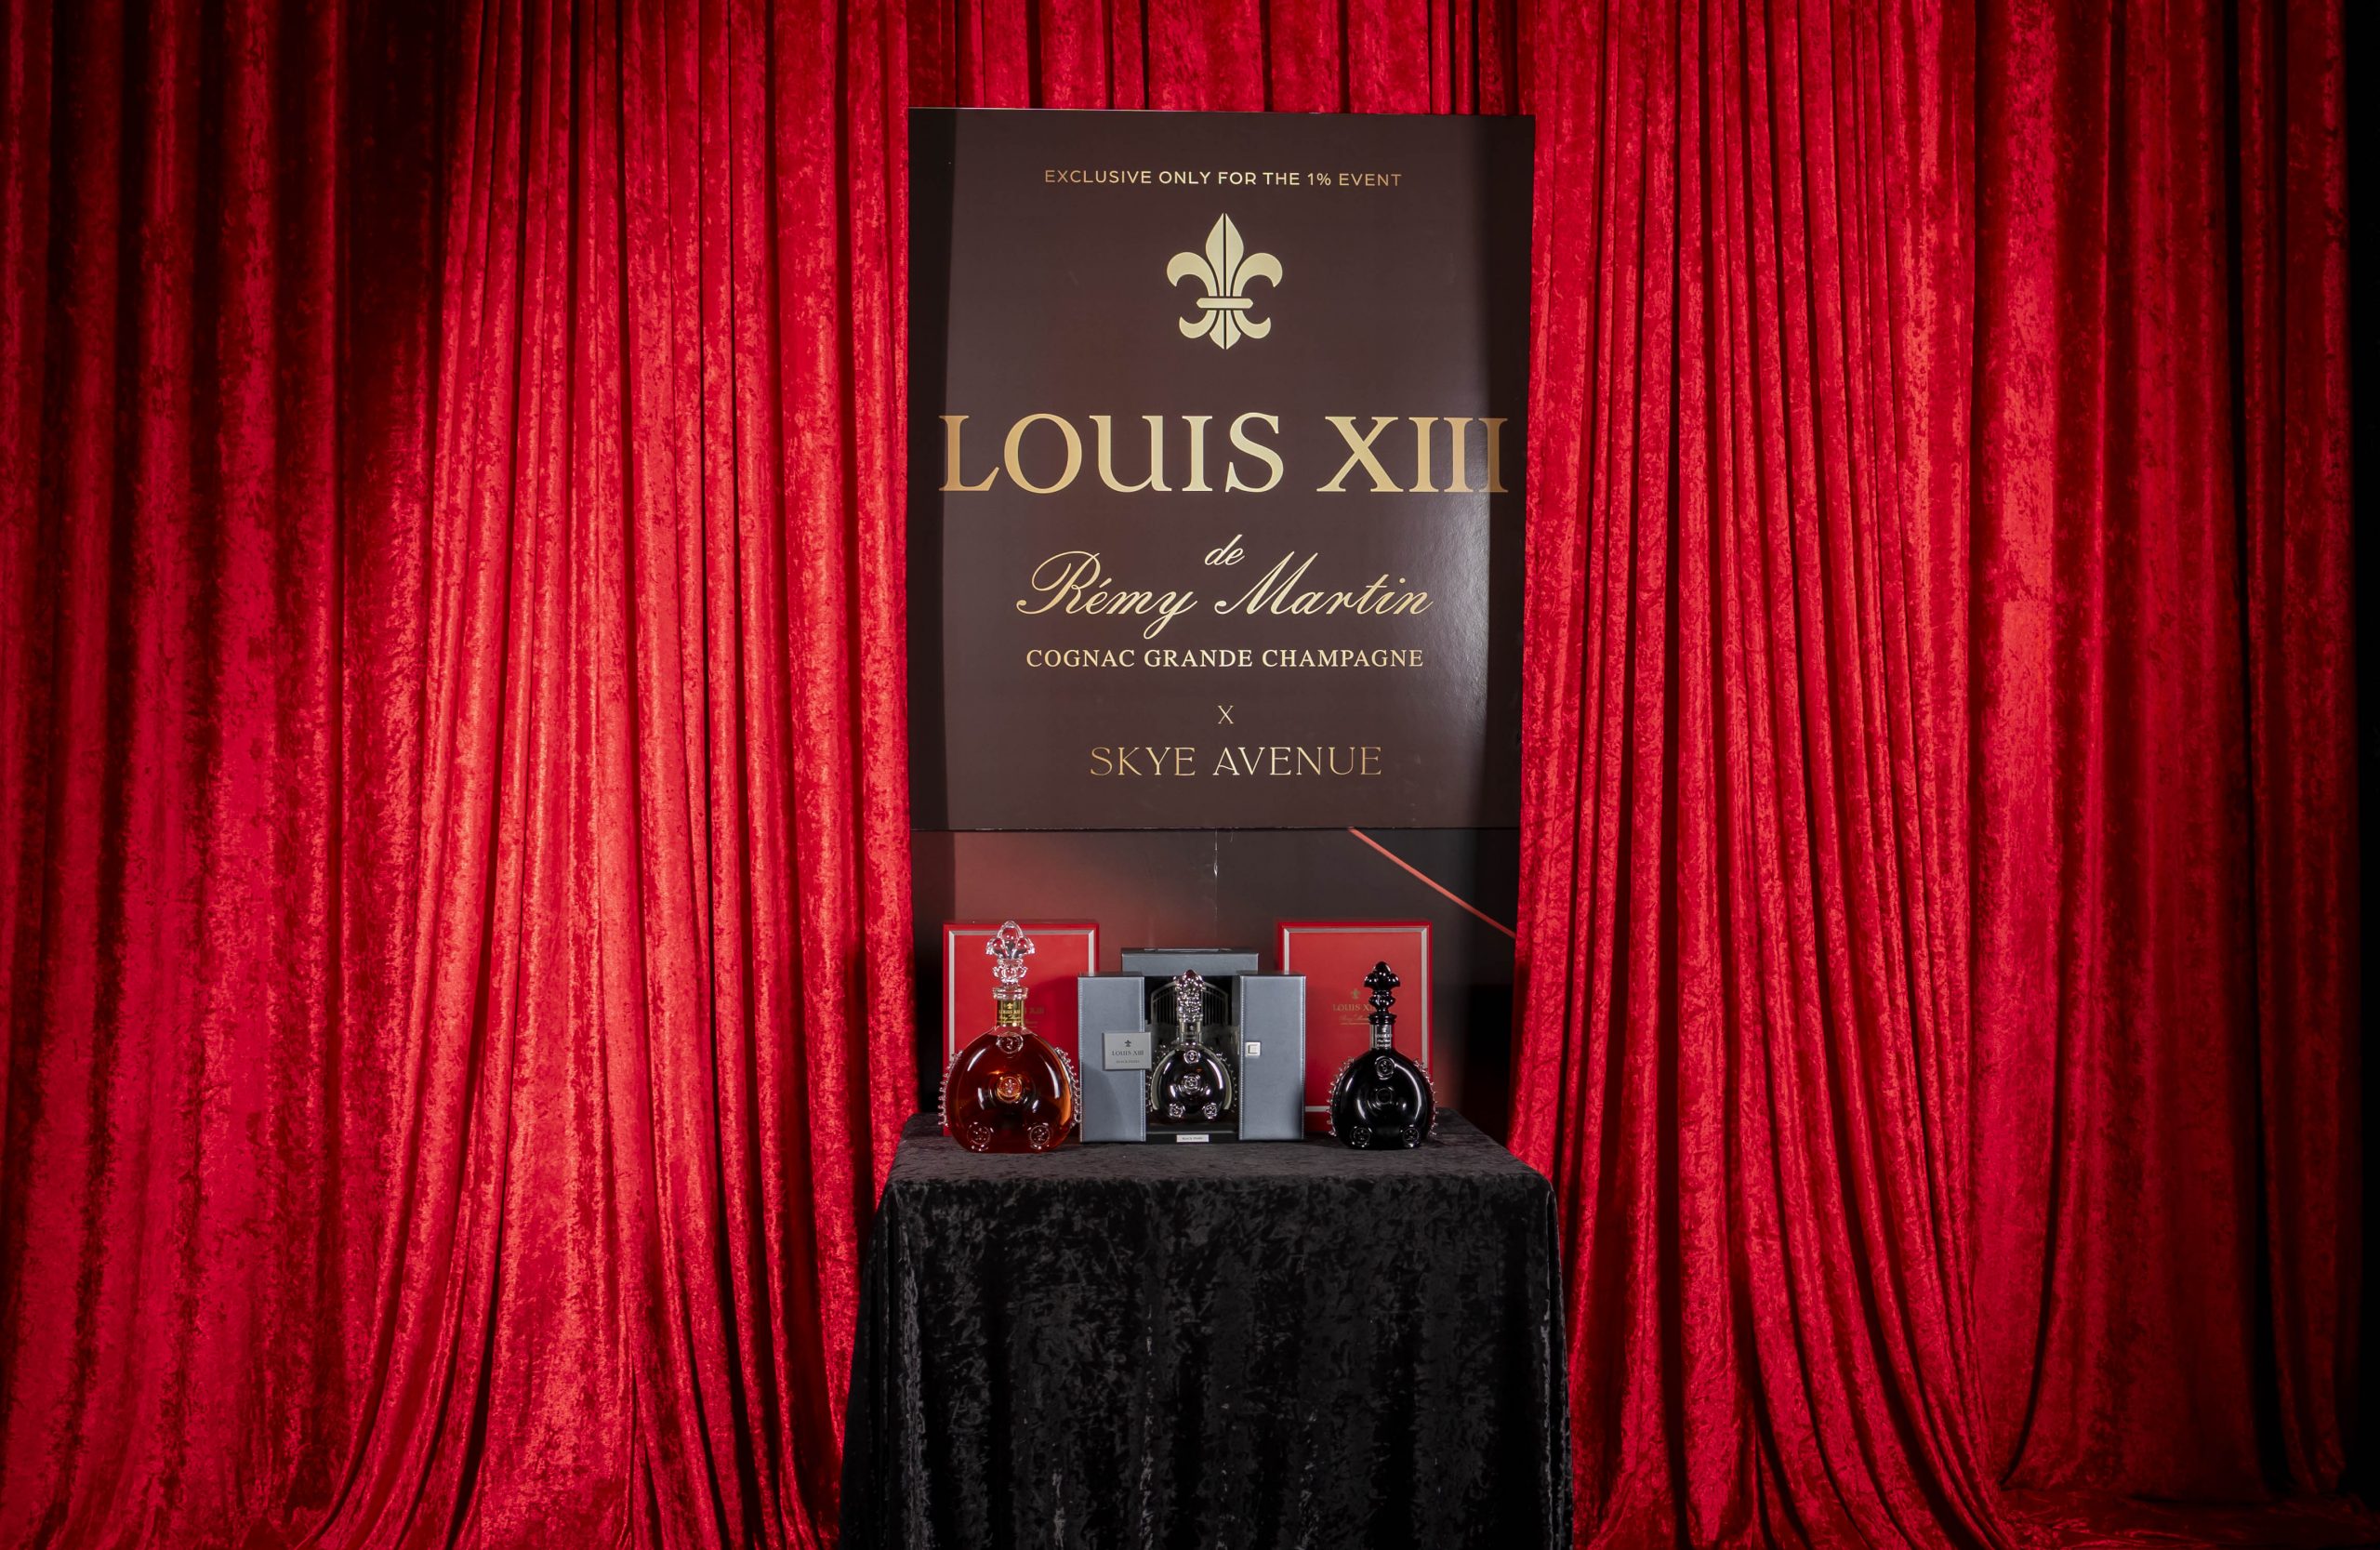 Skye Avenue Exclusive Event for Louis XIII